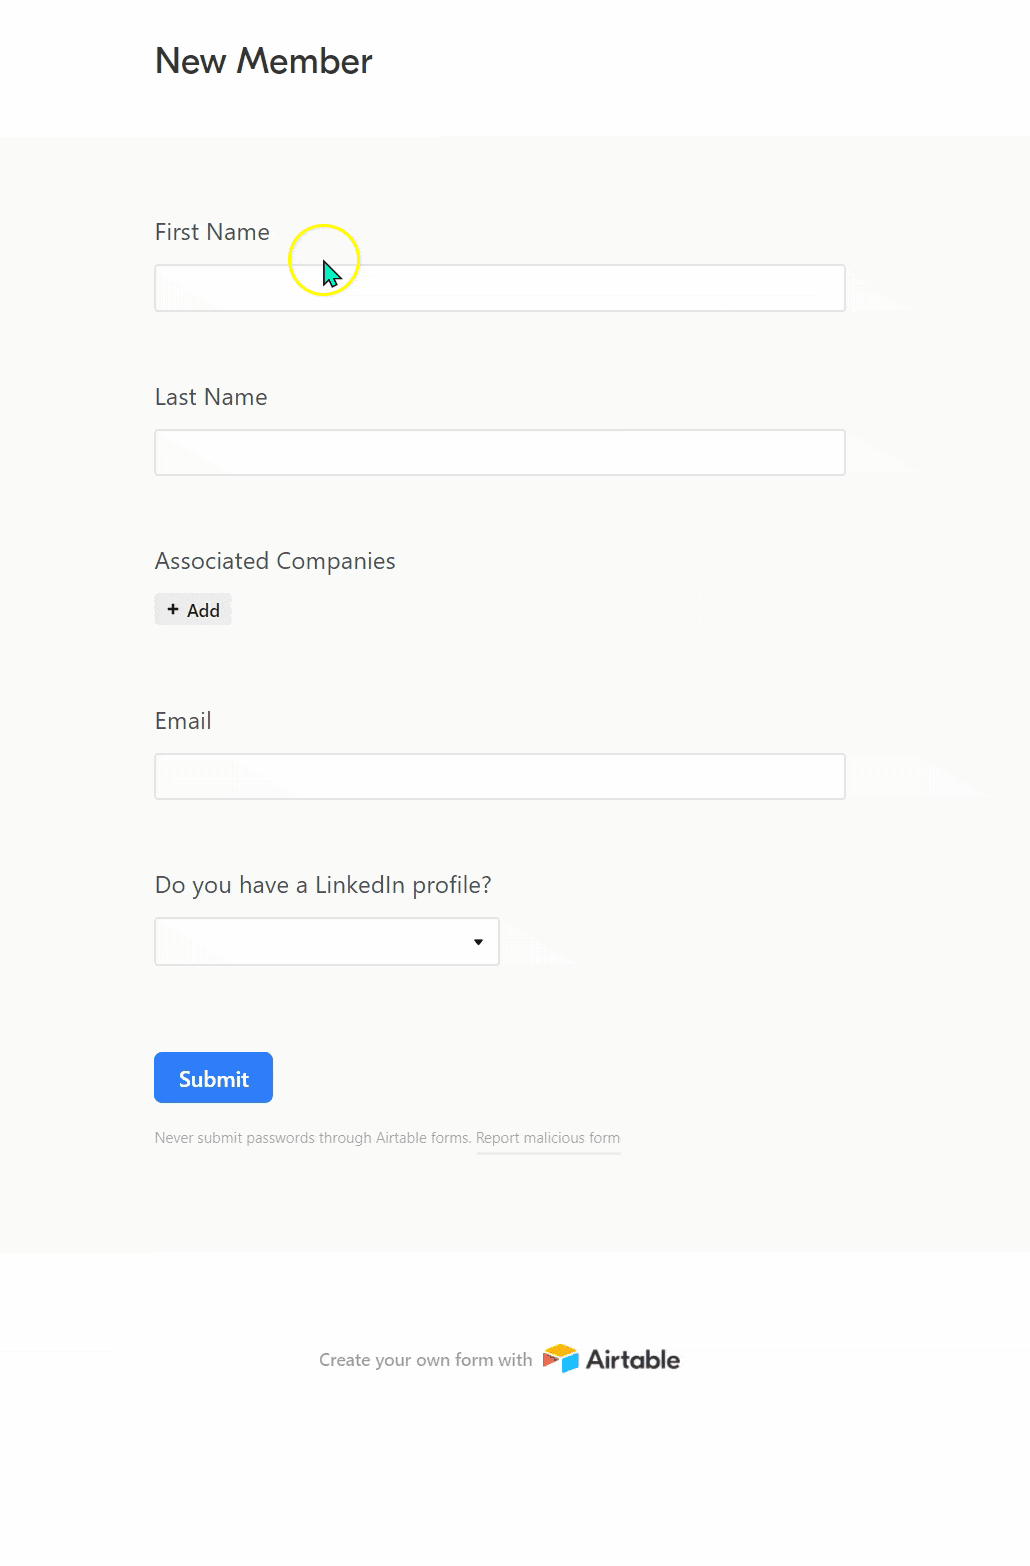 final conditional logic pilot club airtable form entry_small